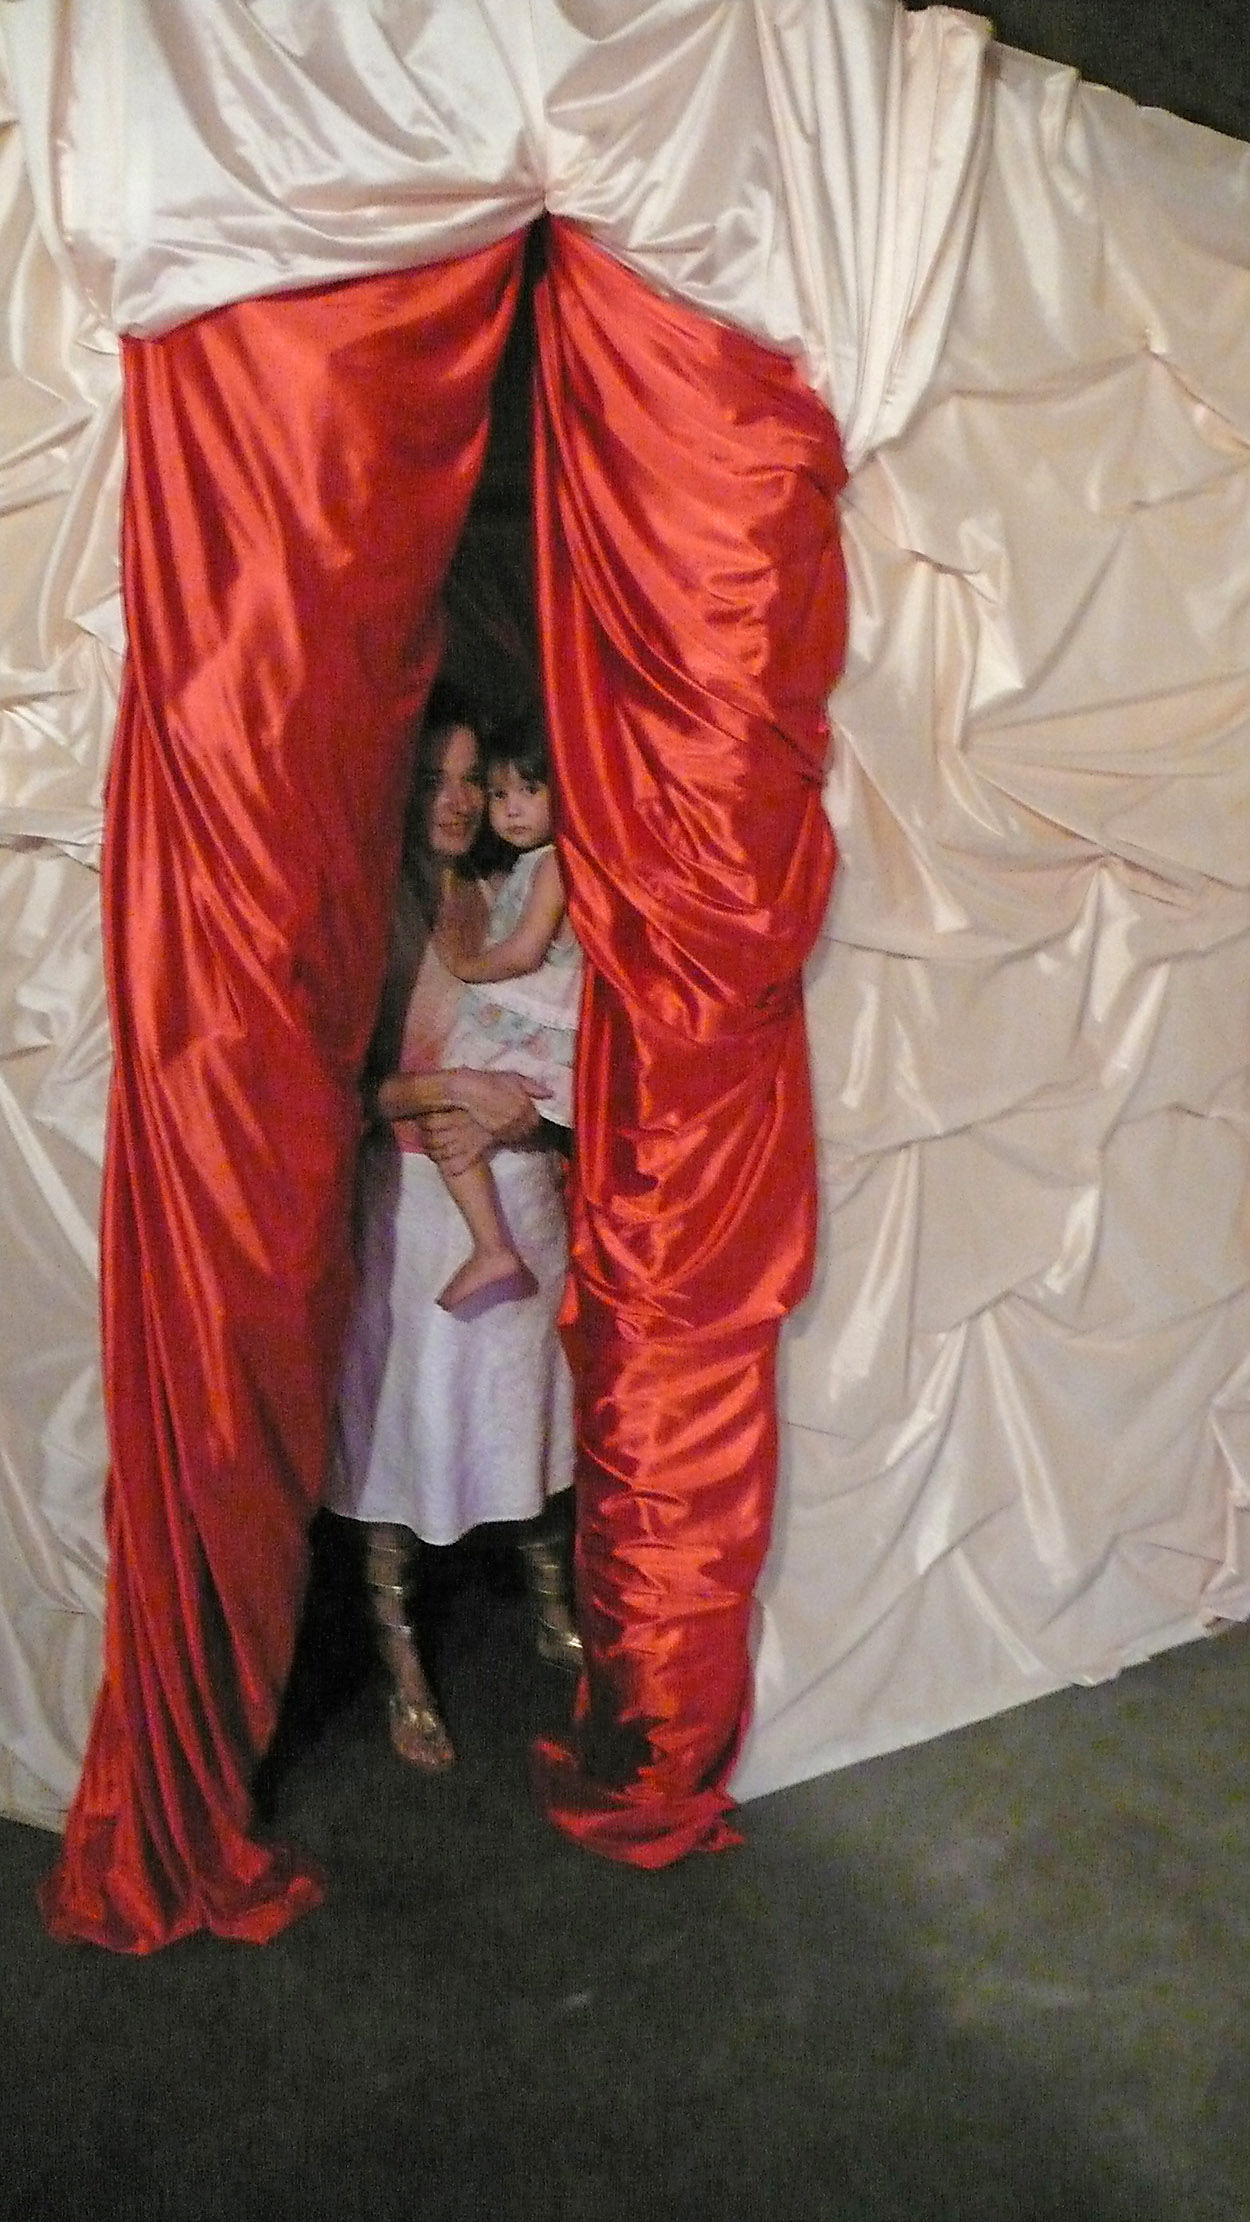  Eliana and Echo coming out of   The Womb Room  . A sensorial experience of regression where the video piece  Umbilical Love  shows in loop.  A self portrait of the artist´s journey into motherhood. 